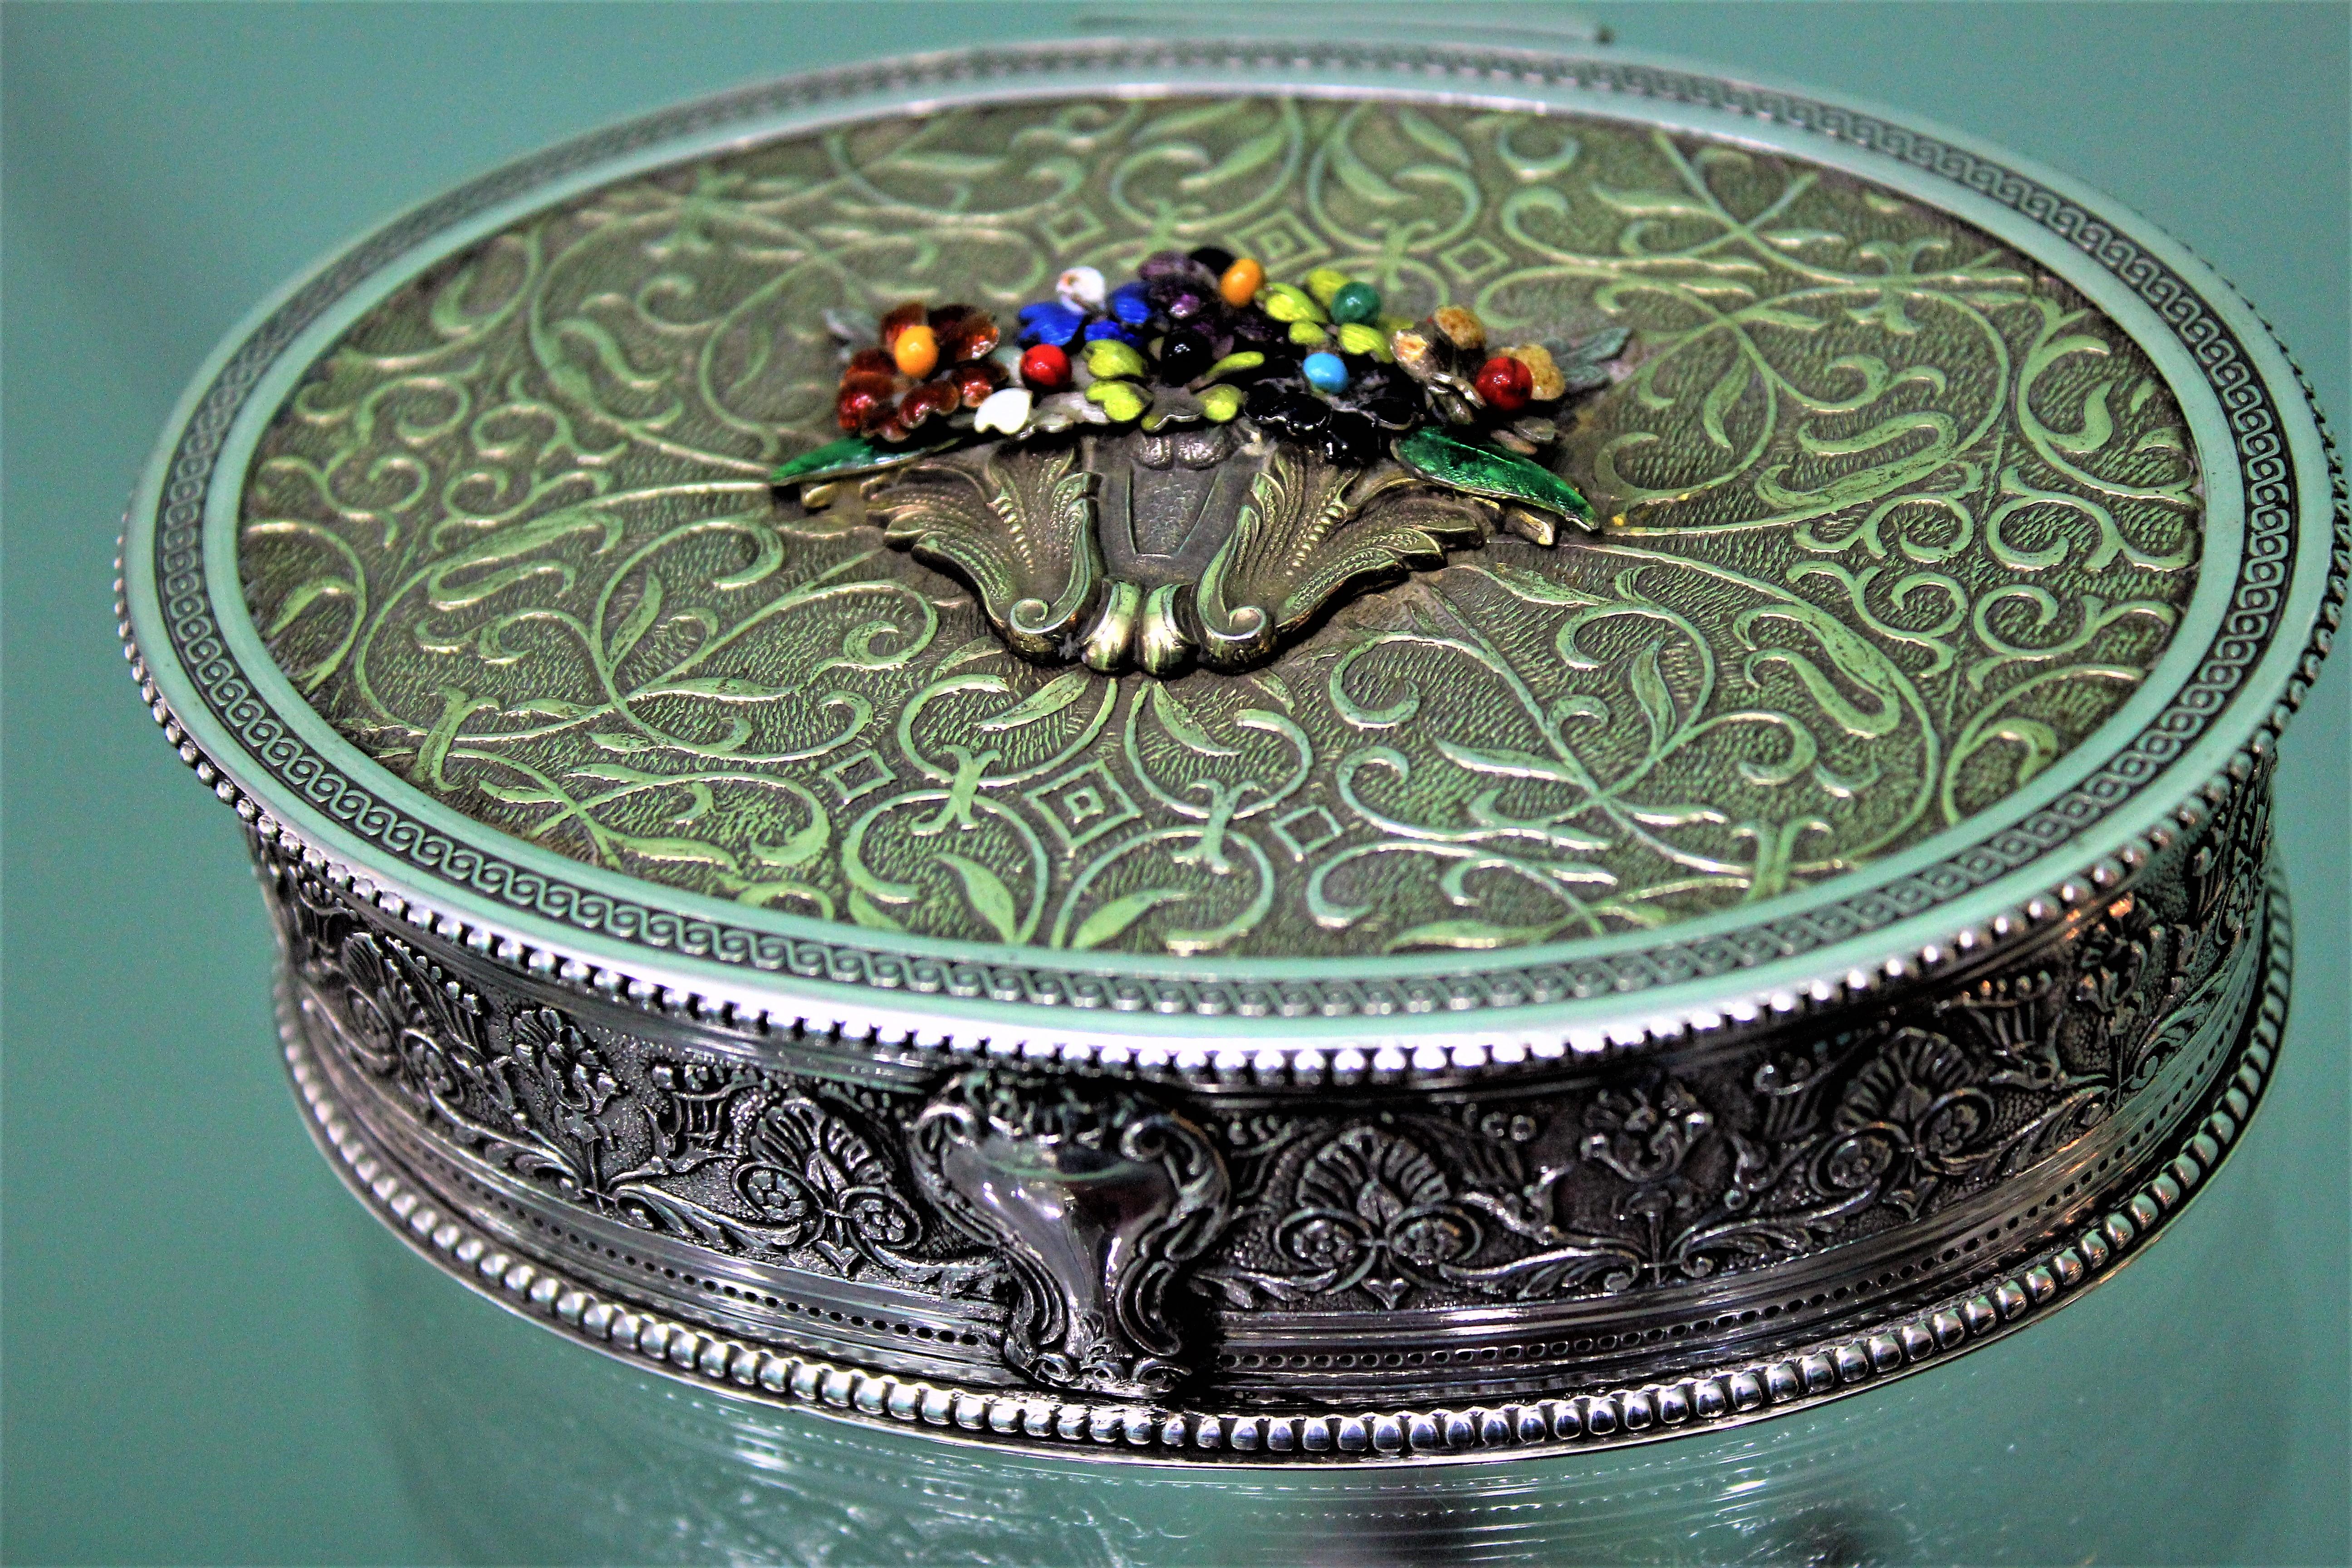 Rococo Revival Stefani Enea 20th Century Engraved Silver with Enamel Table Box, 1970s For Sale